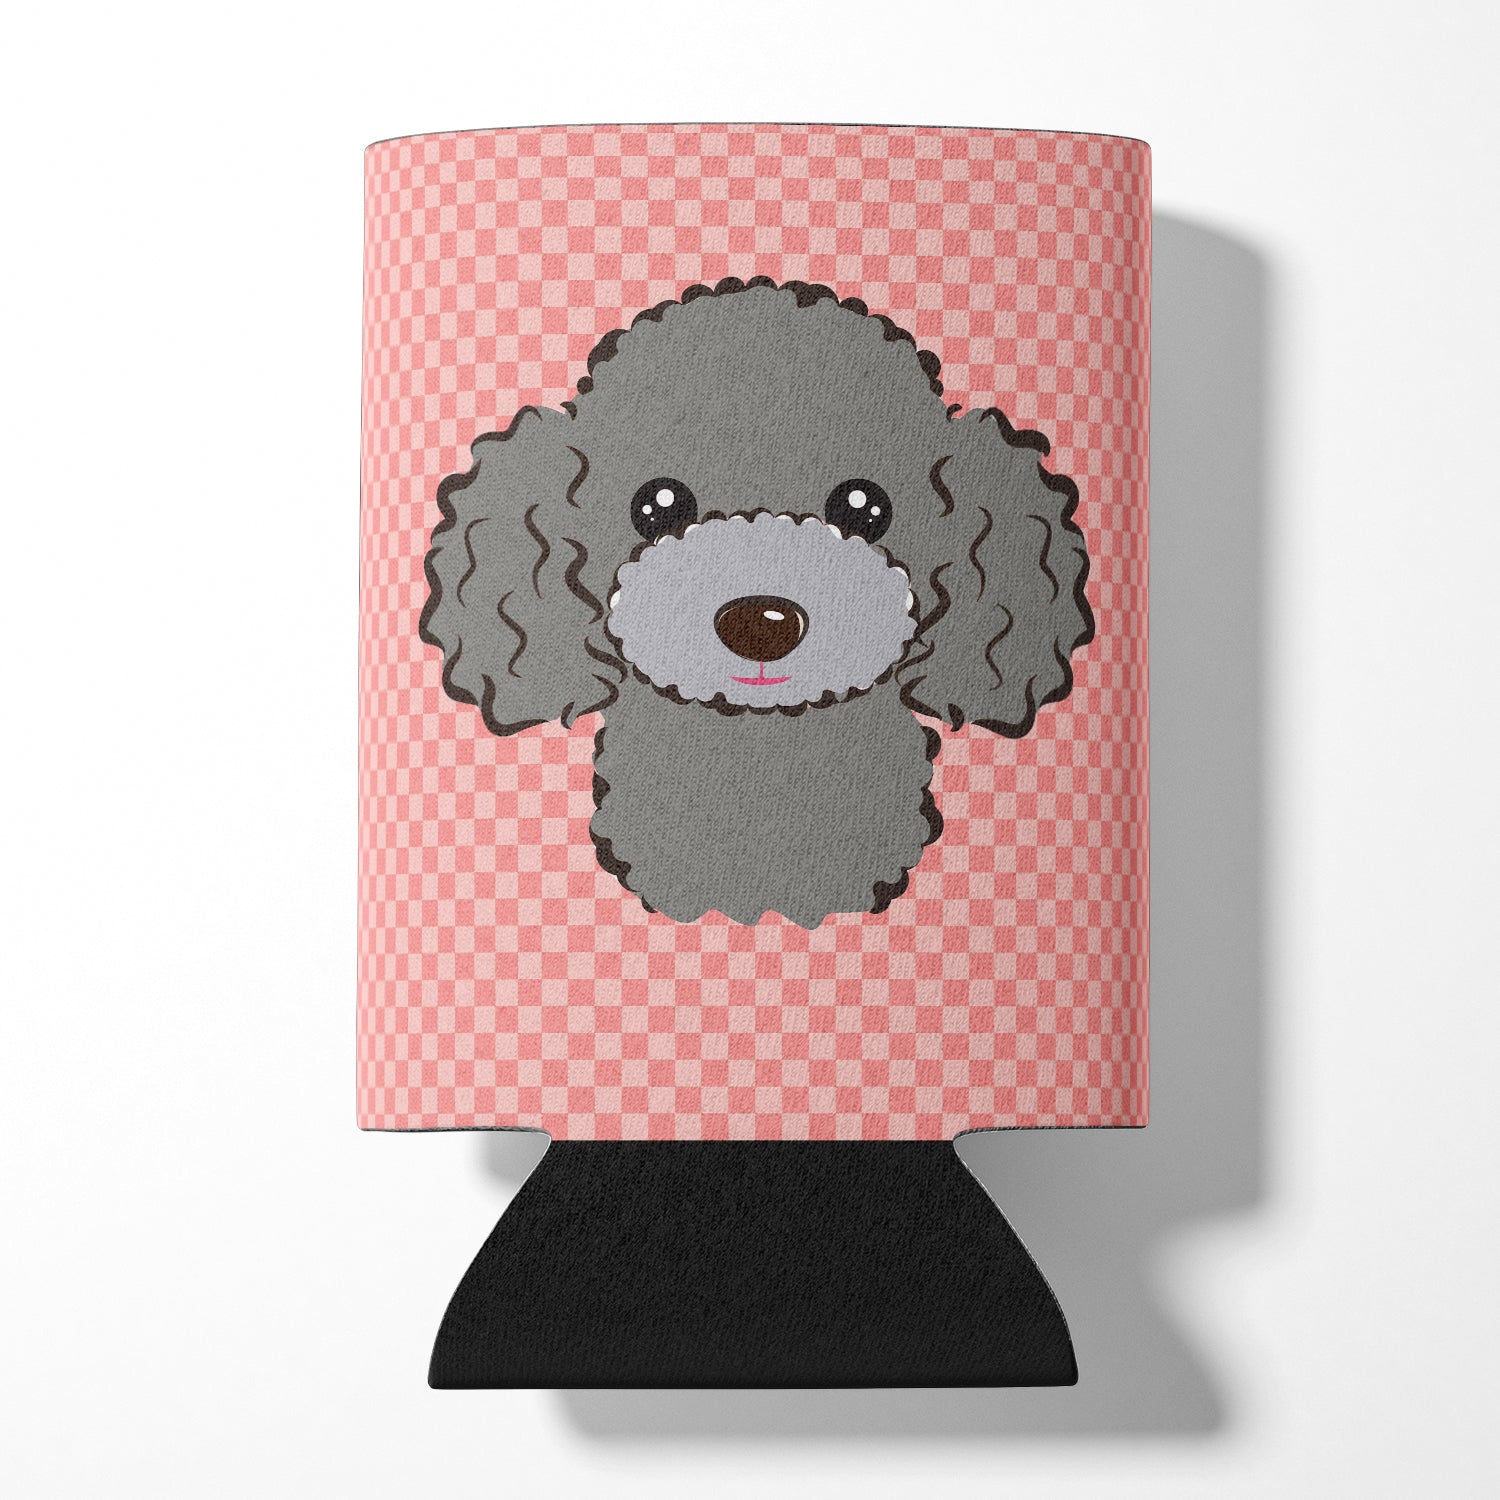 Checkerboard Pink Silver Gray Poodle Can or Bottle Hugger BB1259CC.